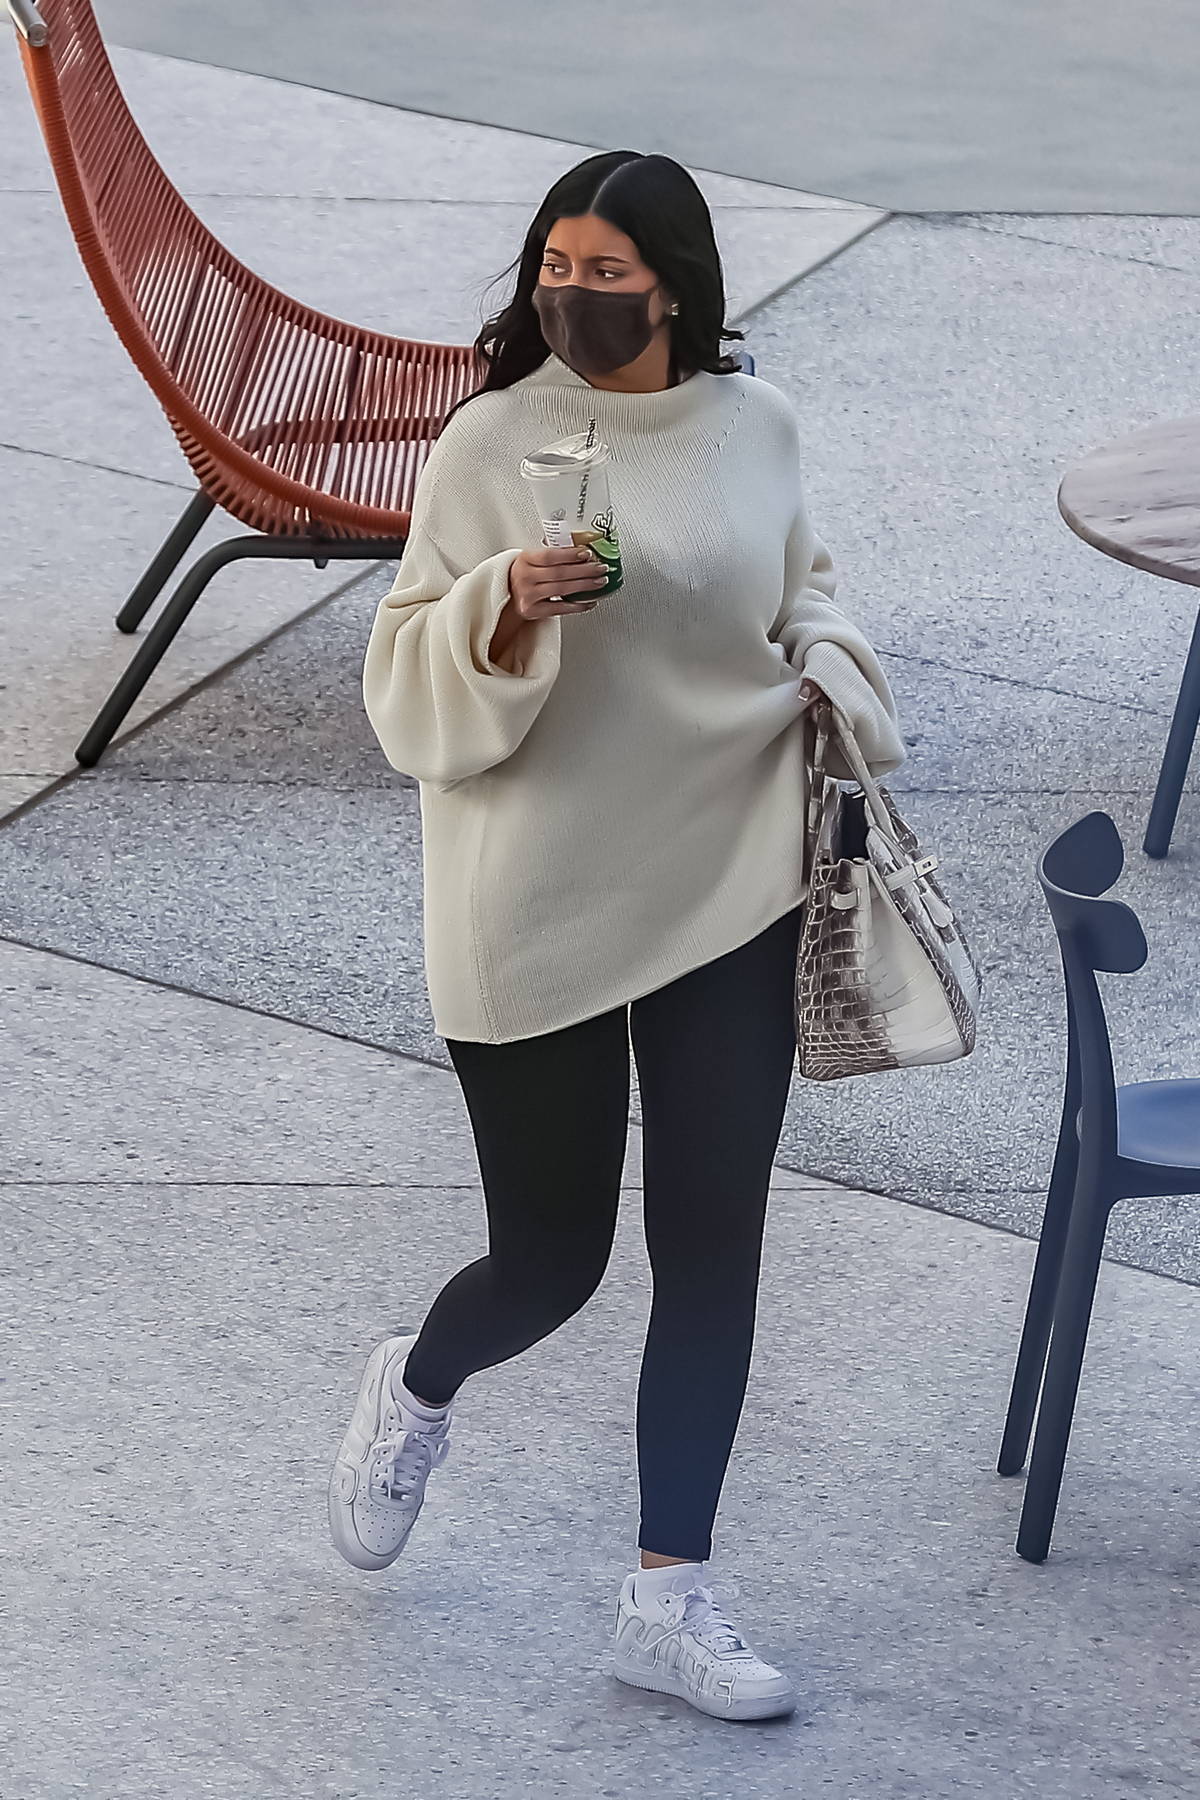 kylie jenner keeps it cozy in an oversized sweater and leggings